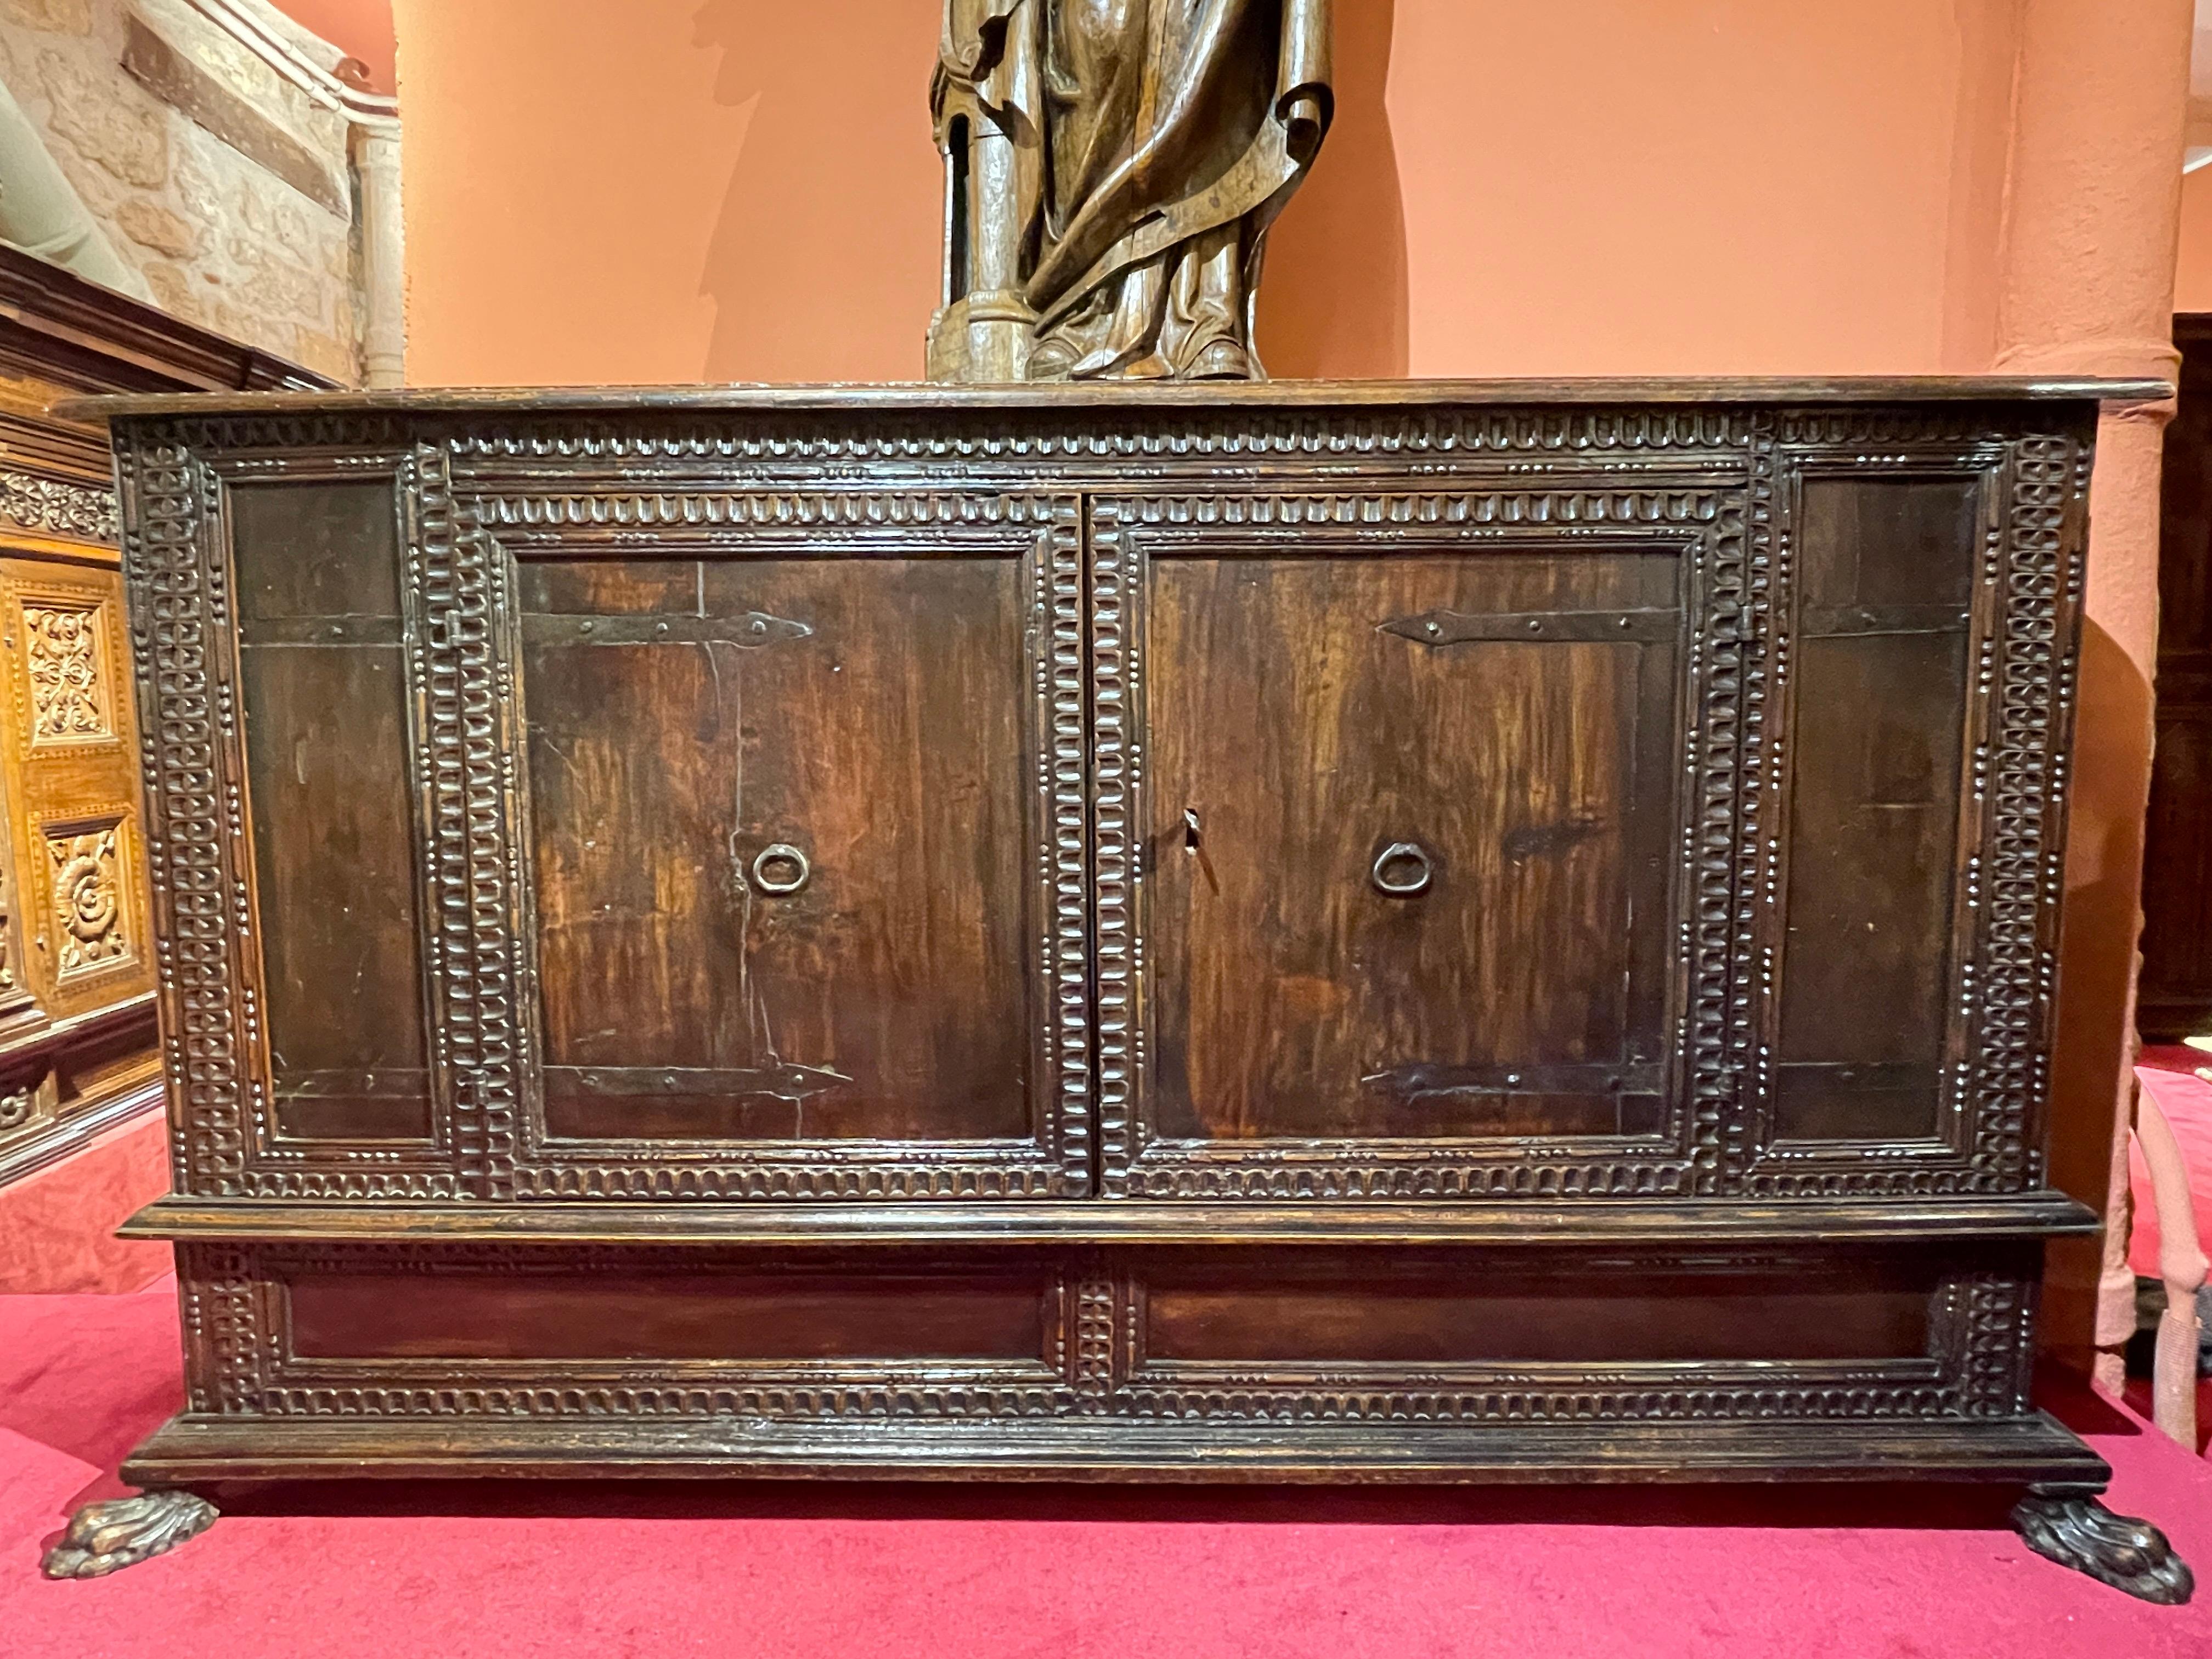 ORIGIN : ITALY, VENICE
PERIOD : 16th CENTURY
 
Height: 103 cm
Length: 174 cm
Depth 45 cm
 
Walnut
Usual restoration
 
 
The low sideboard with several doors became more common in the 16th century in northern Italy. Palace furniture used in the